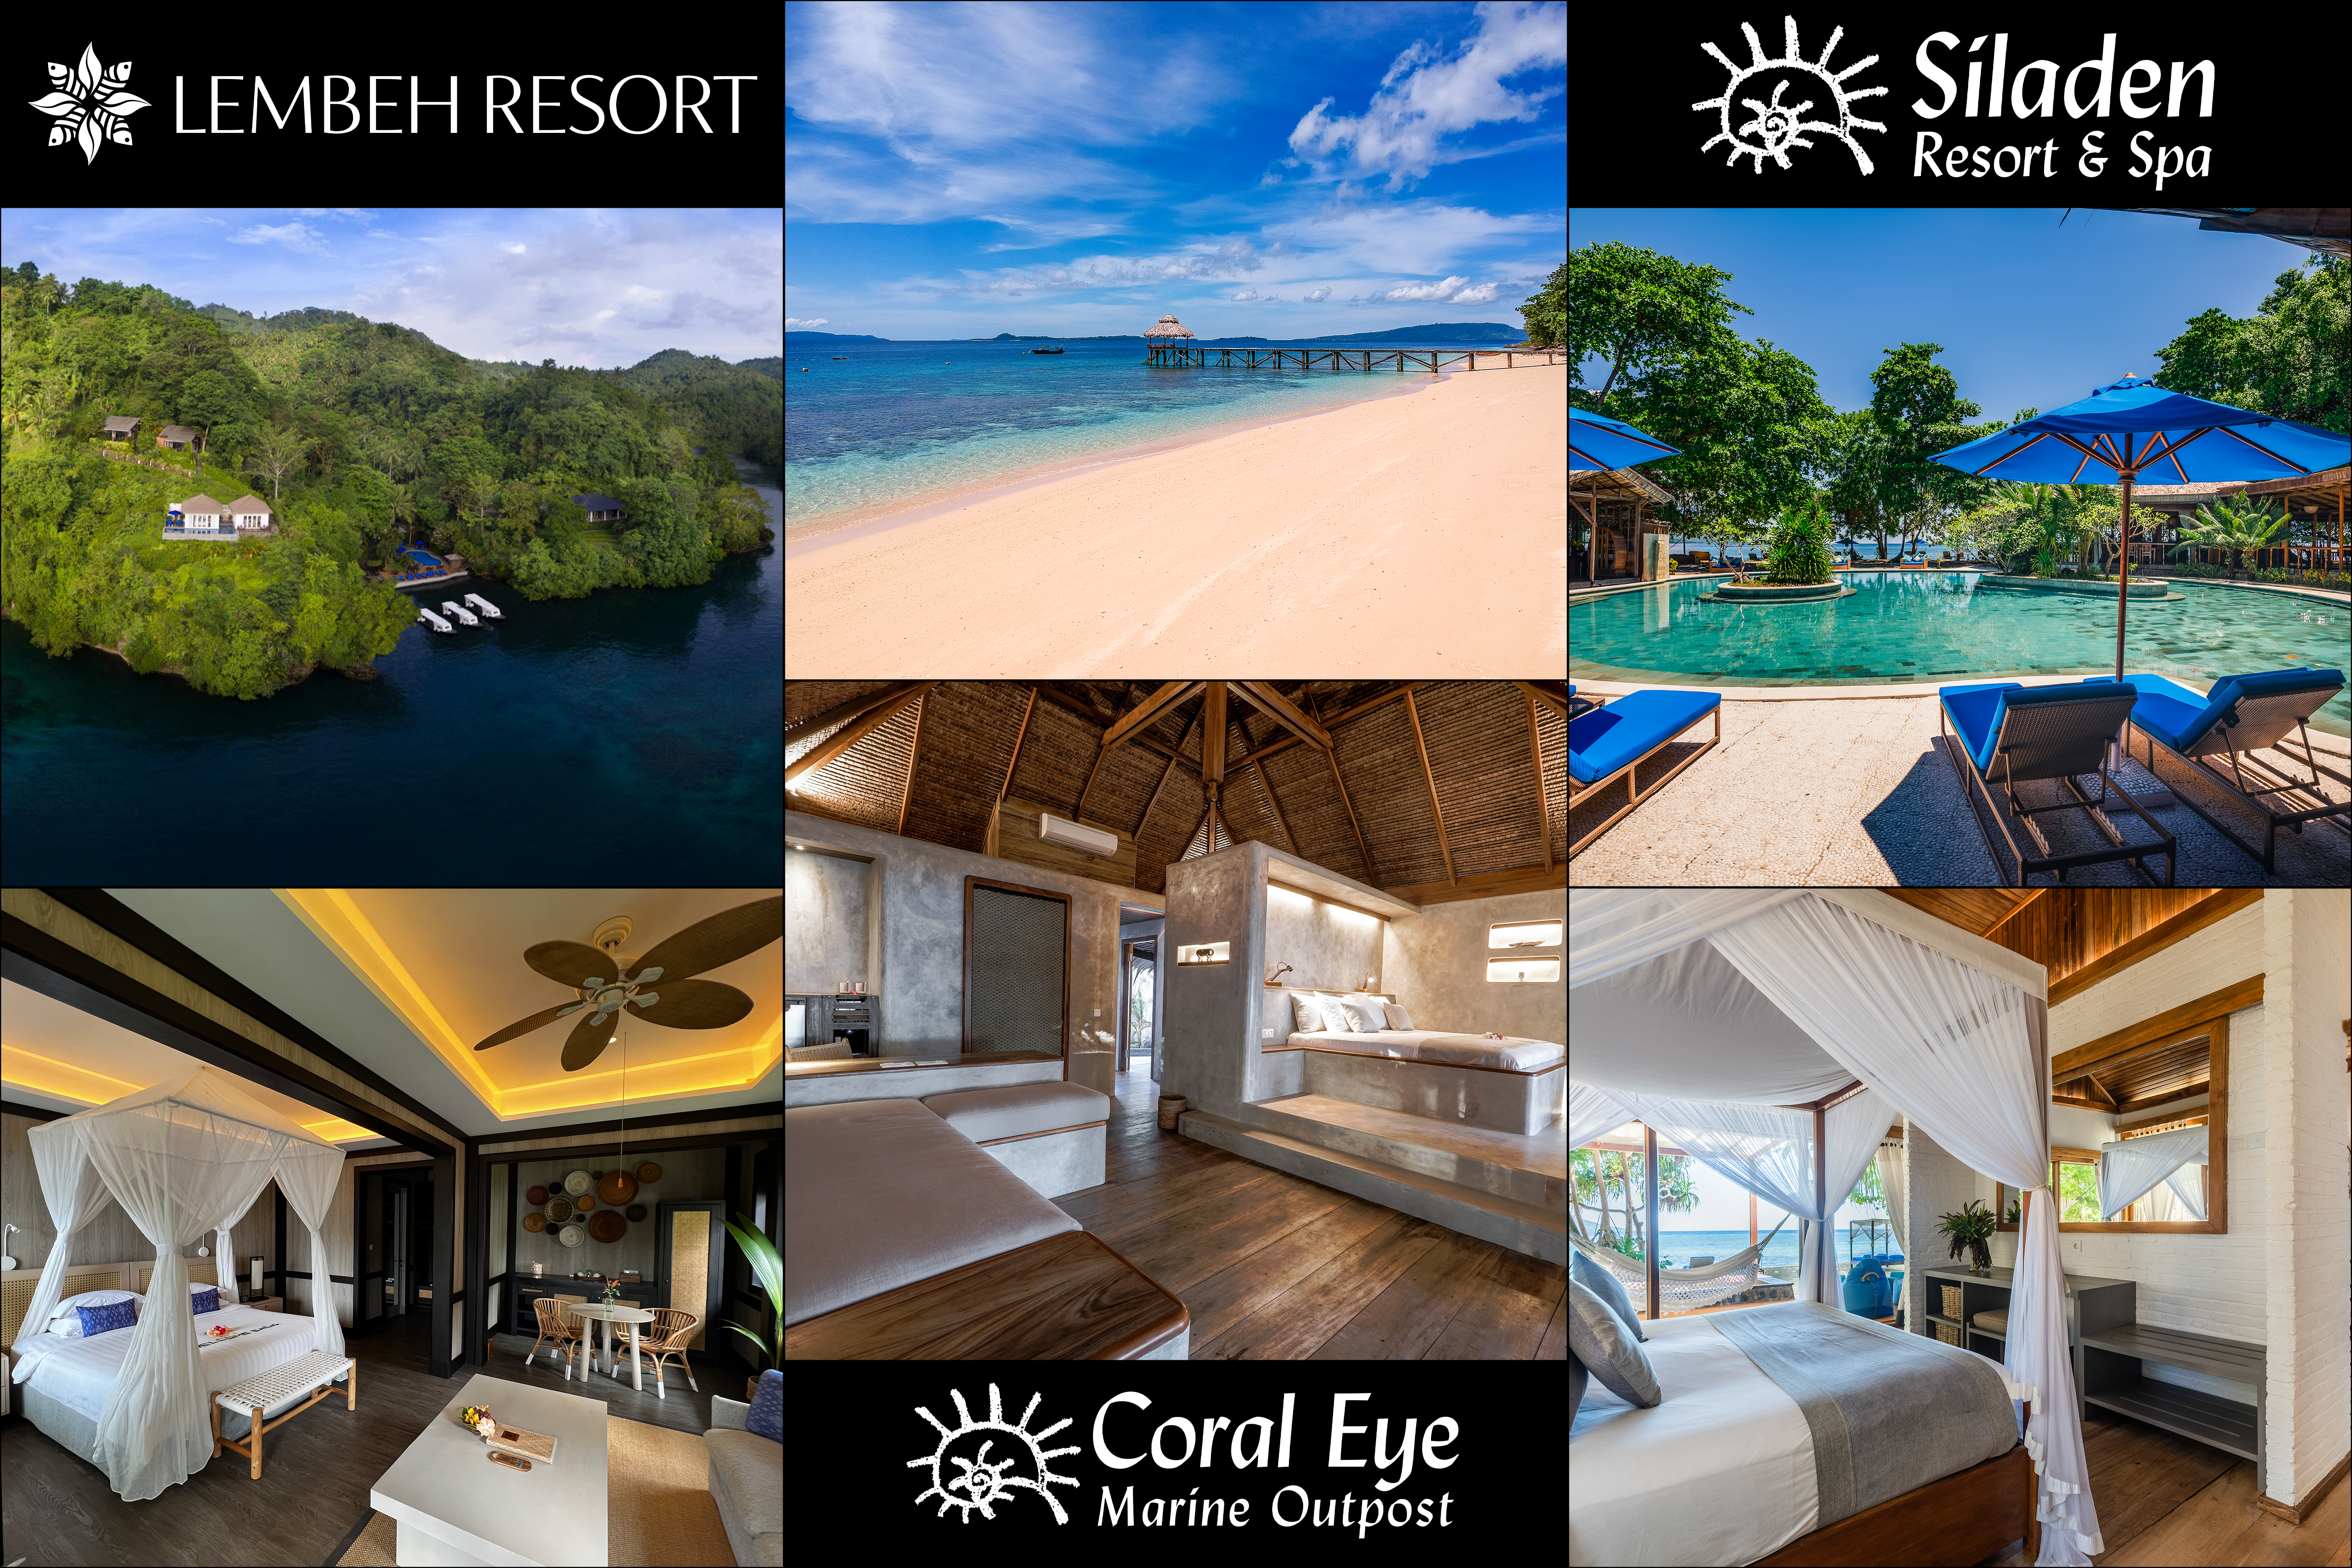 LEMBEH RESORT, CORAL EYE, AND SILADEN